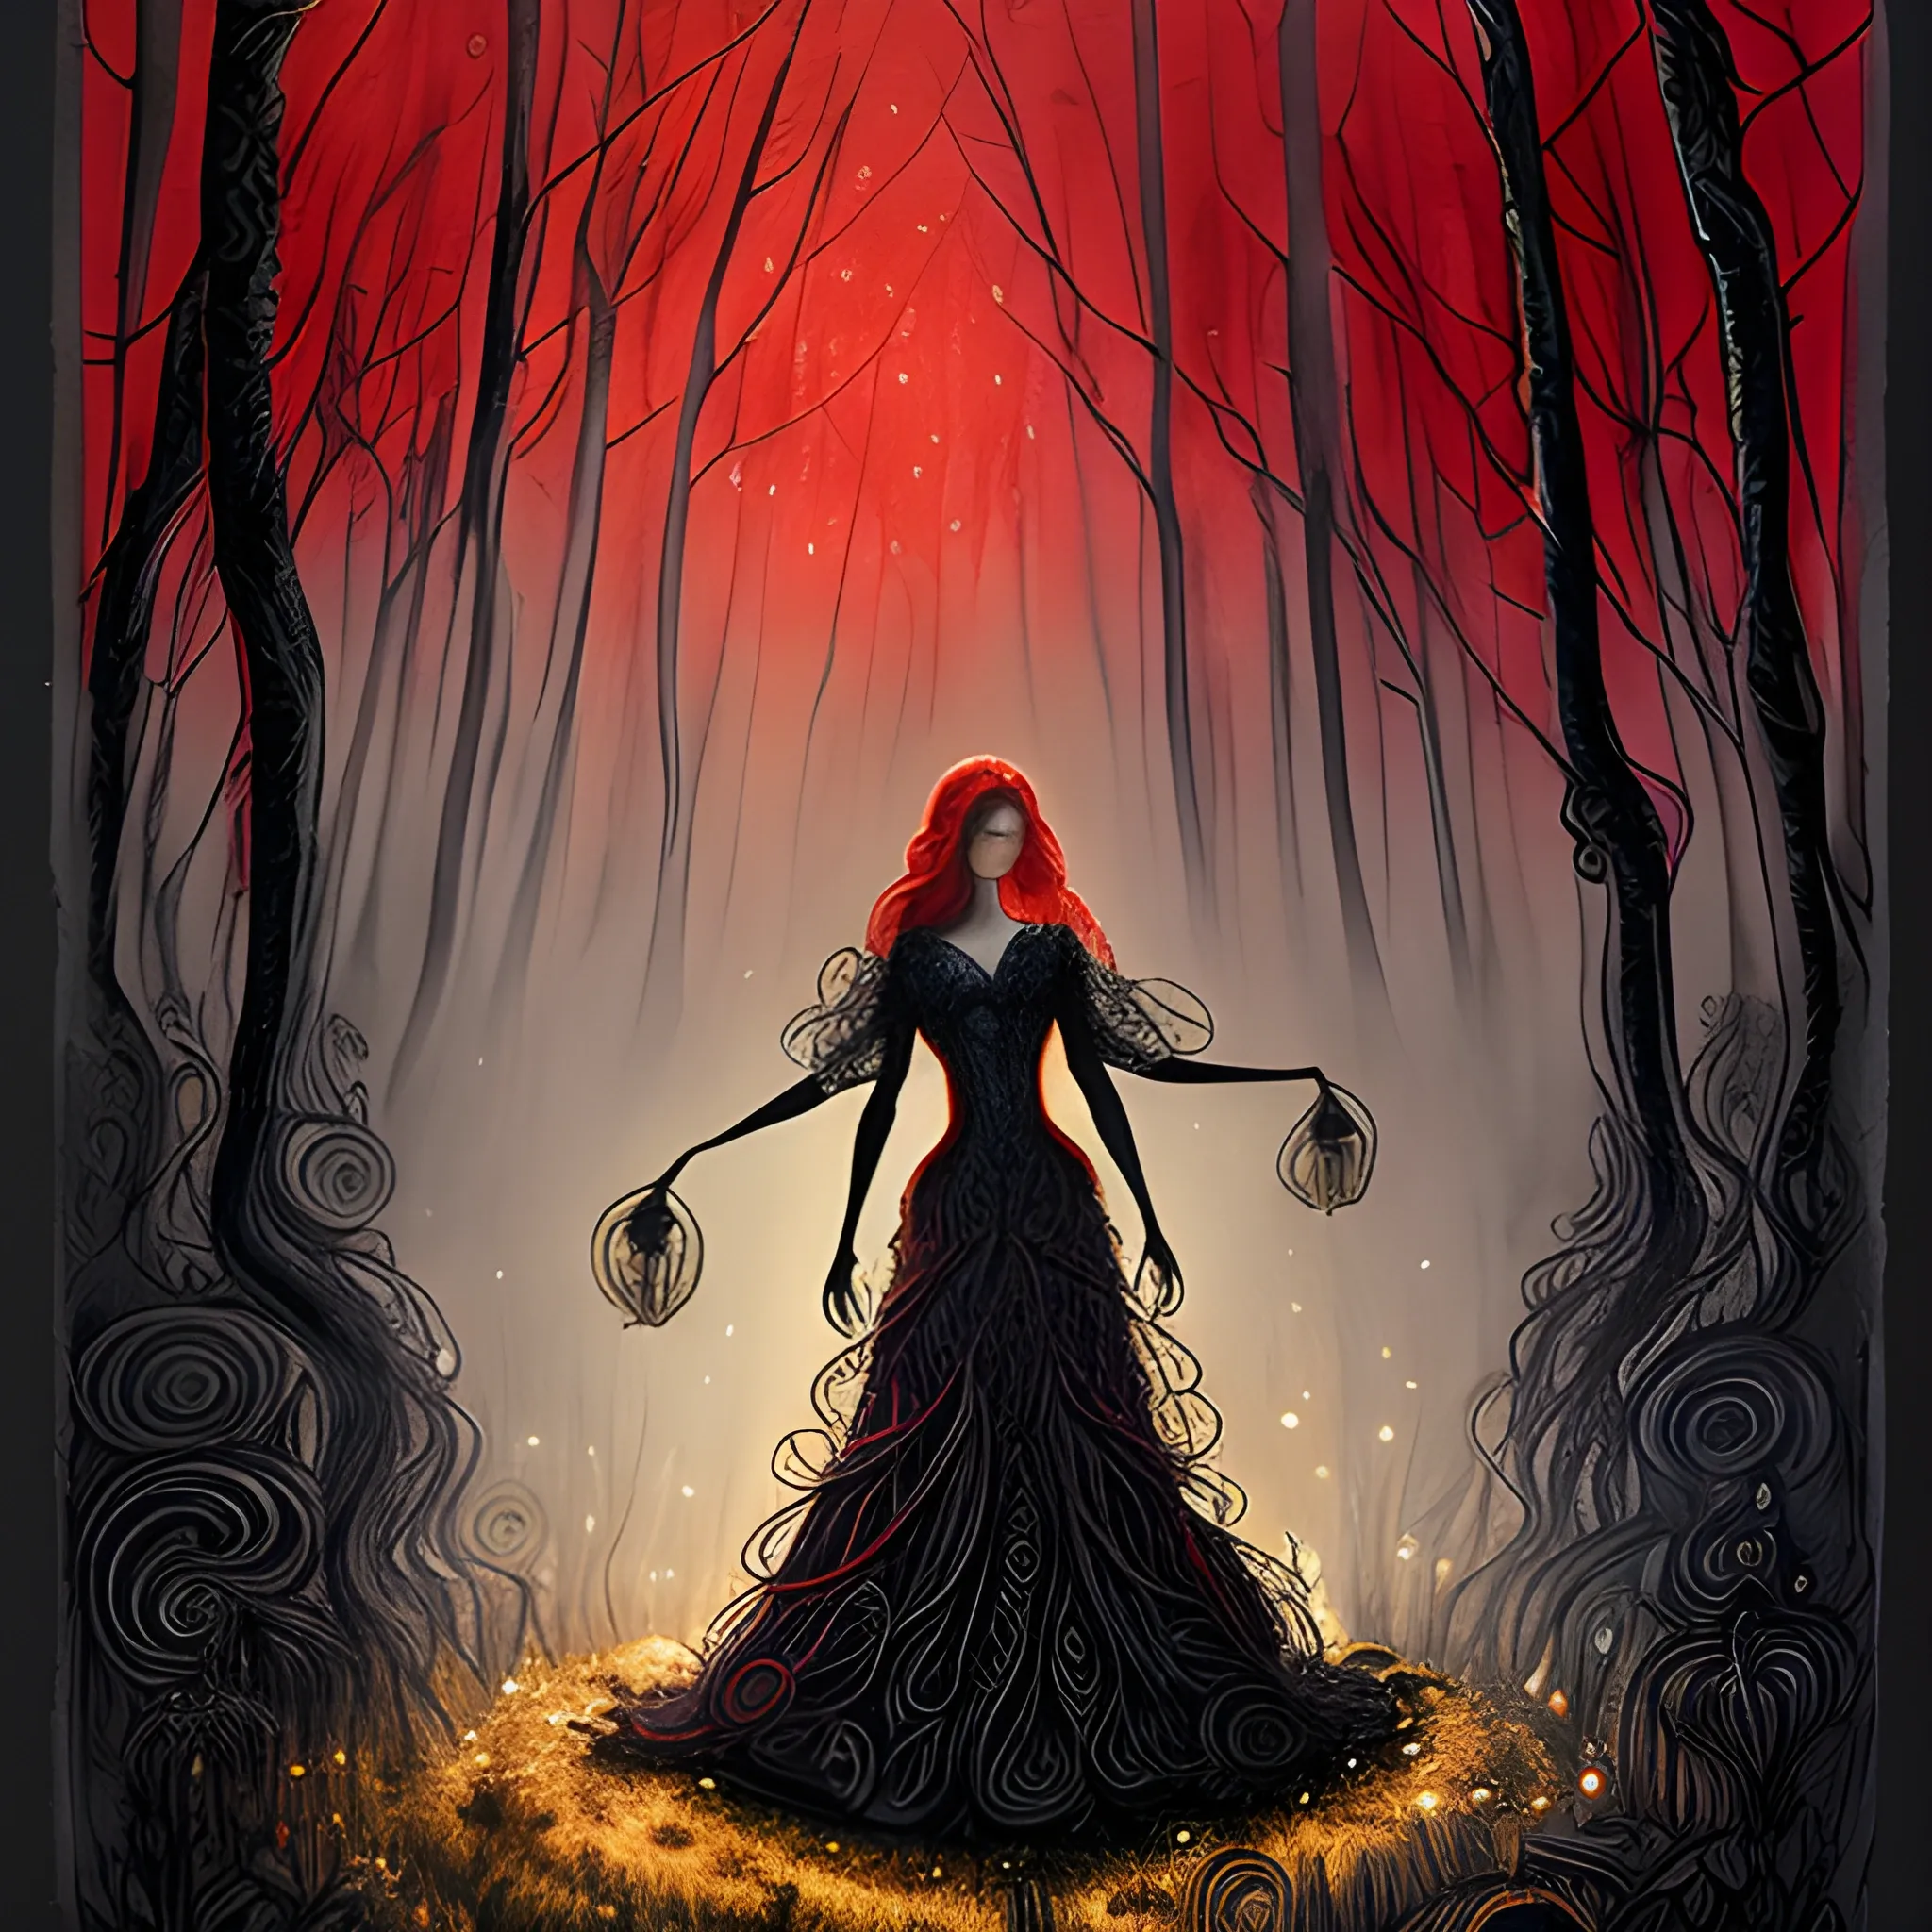 Draw a woman in a dark enchanted forest, surrounded by giant spiders weaving an elaborate dress with threads of silver and gold. Use a single-color watercolor technique (red) to capture the magical atmosphere of this scene in the style of Francisco Garcés, alias Dibujante Nocturno.